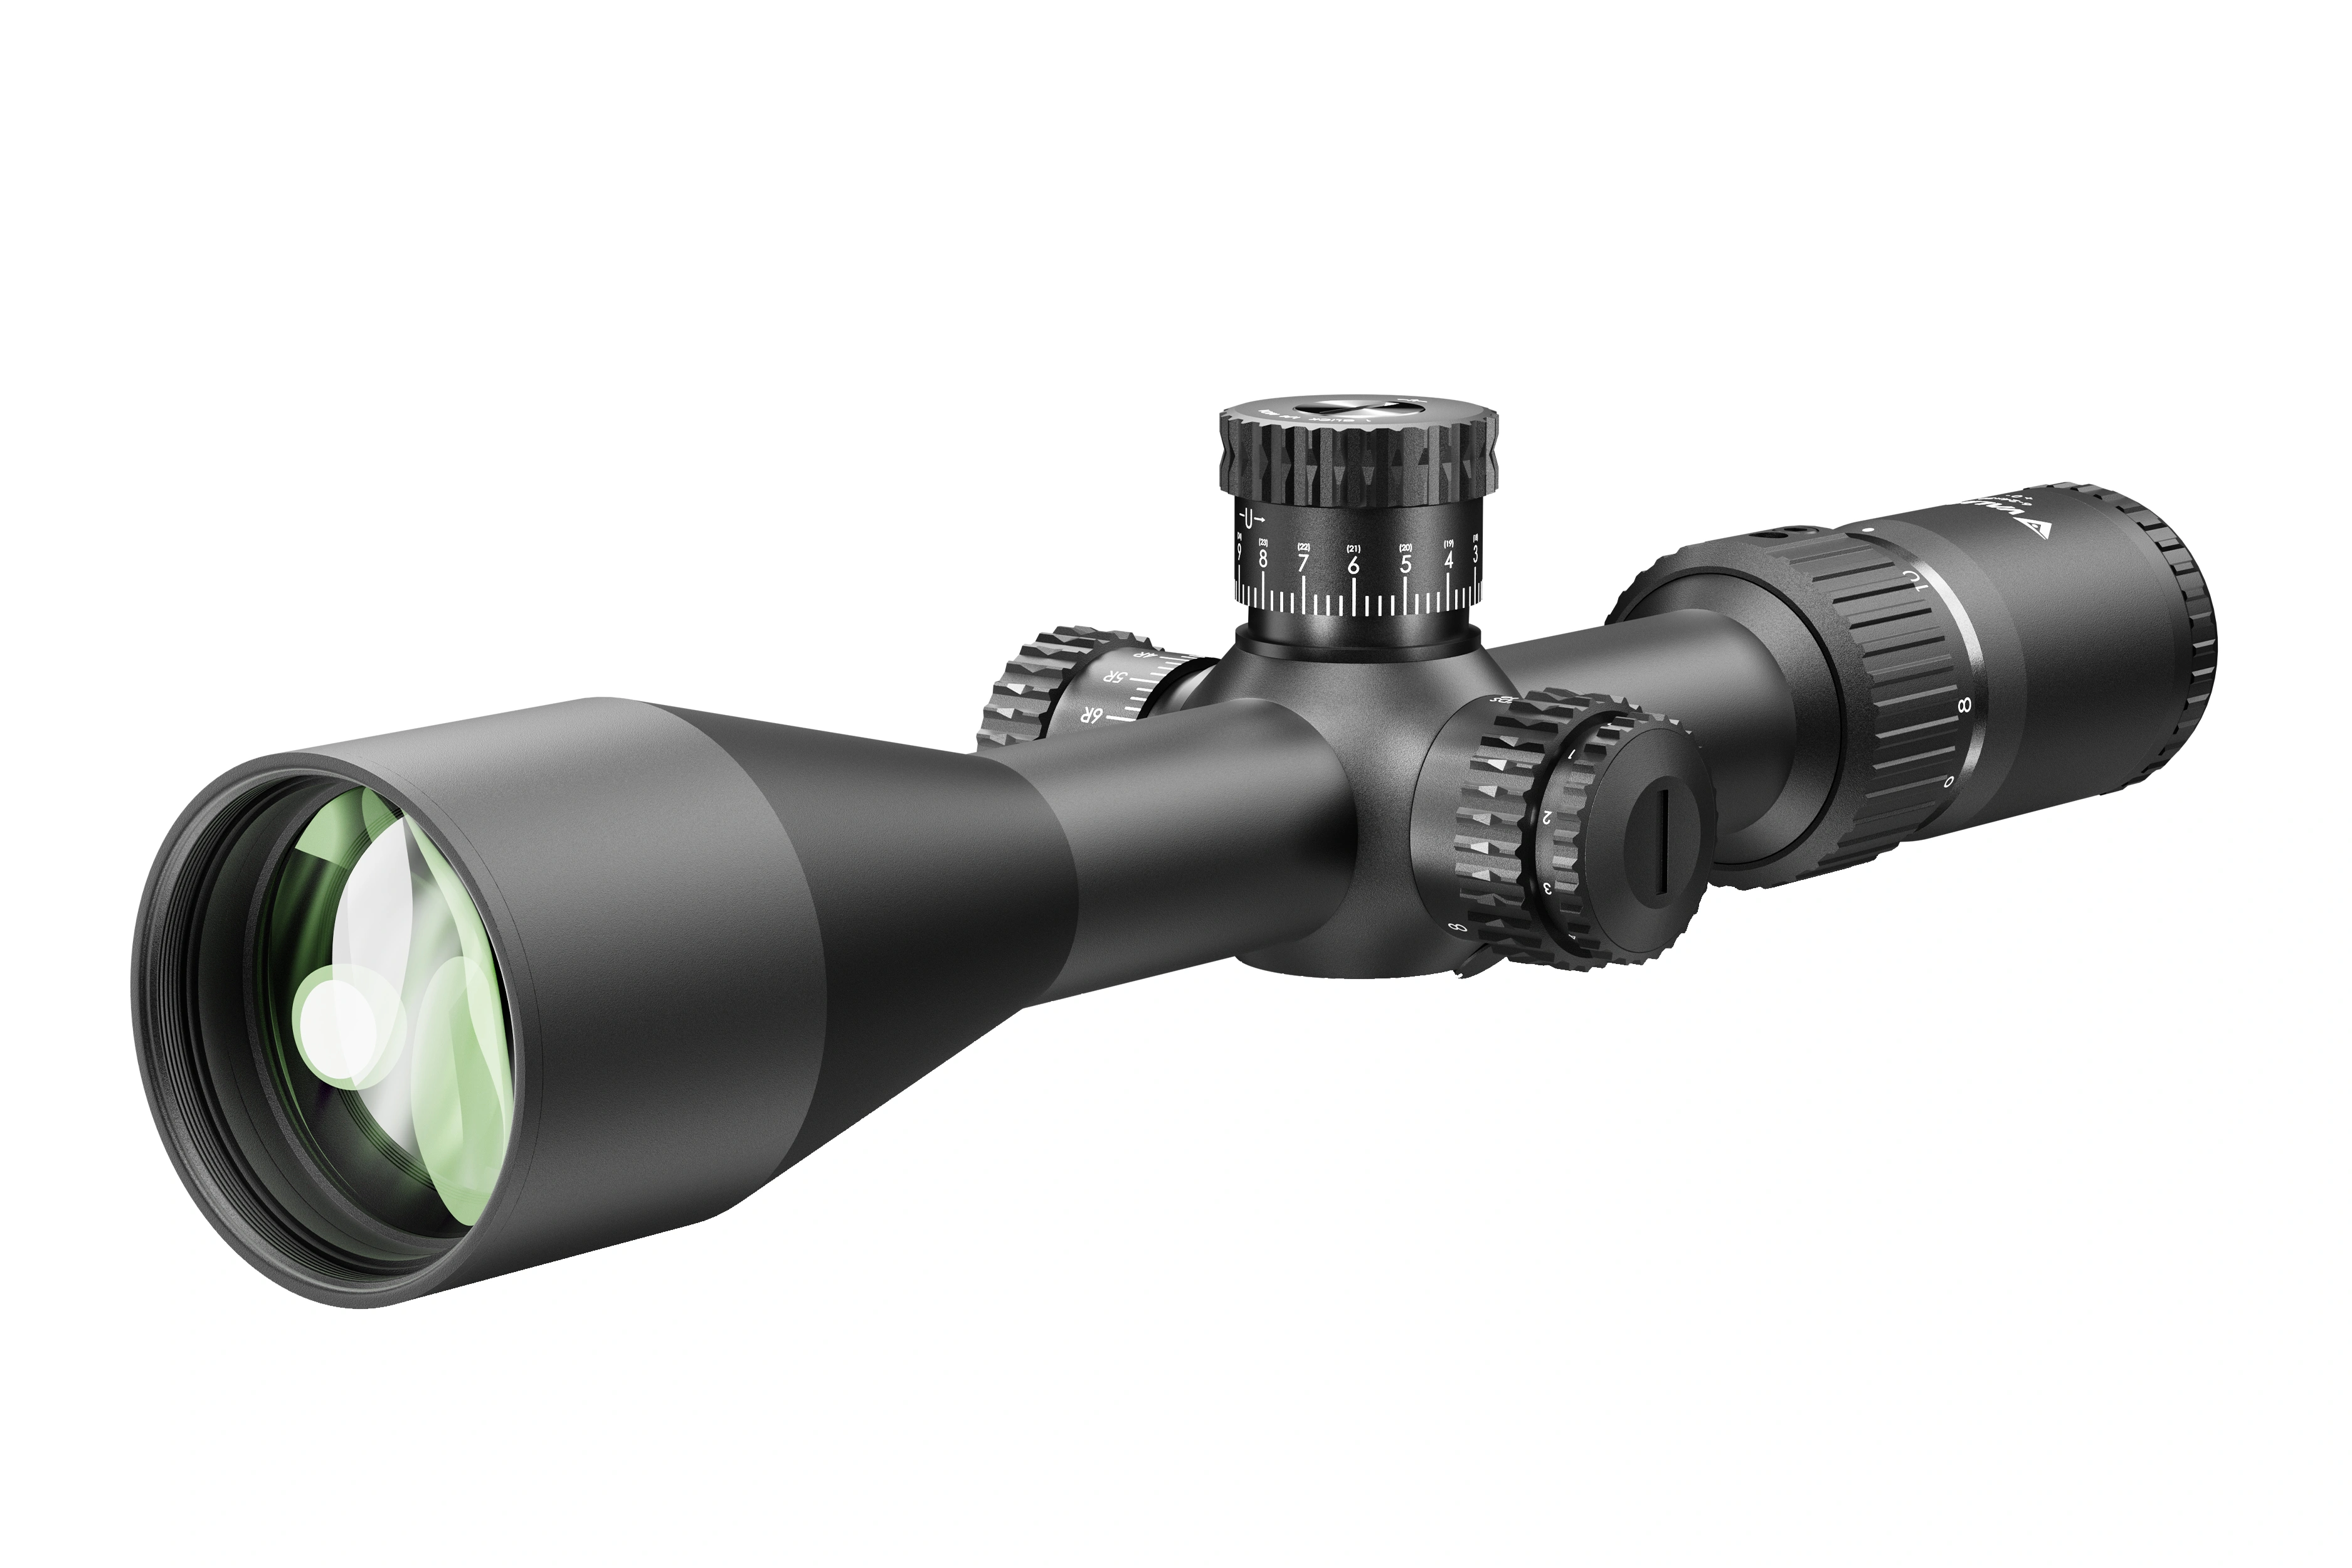 Achieve best results with our best scopes